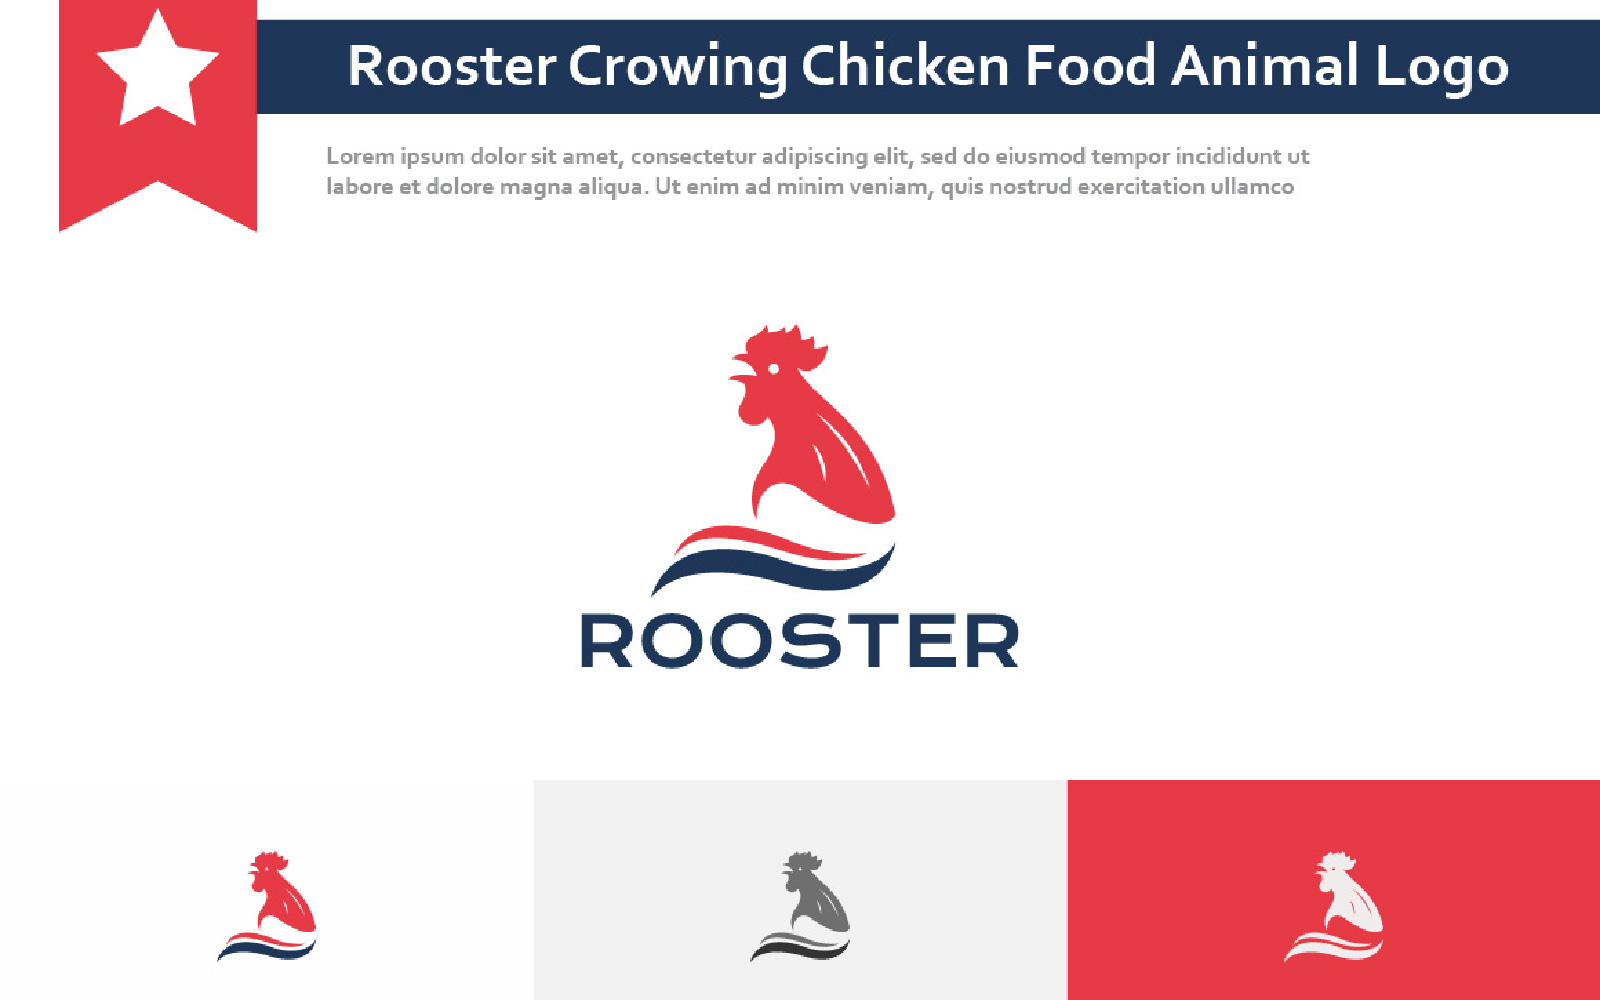 Rooster Crowing Chicken Food Animal Farm Logo